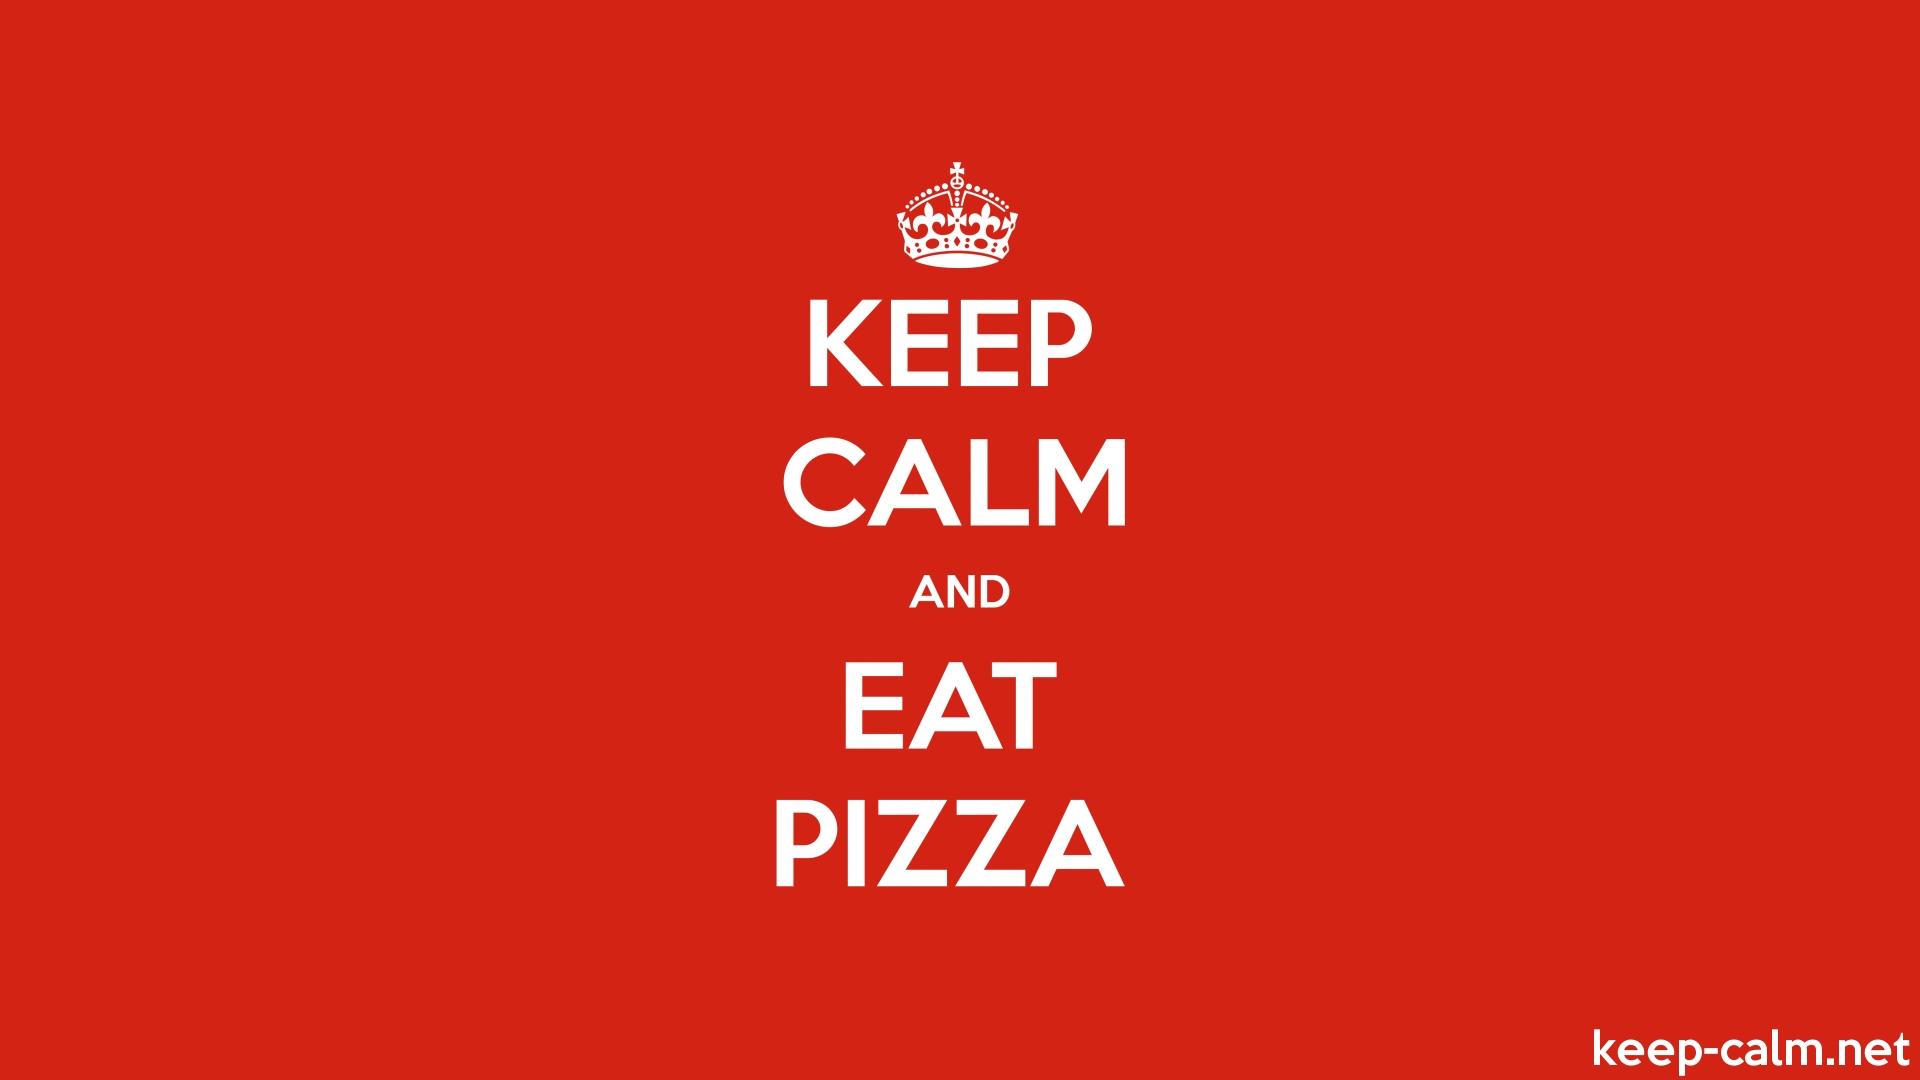 KEEP CALM AND EAT PIZZA